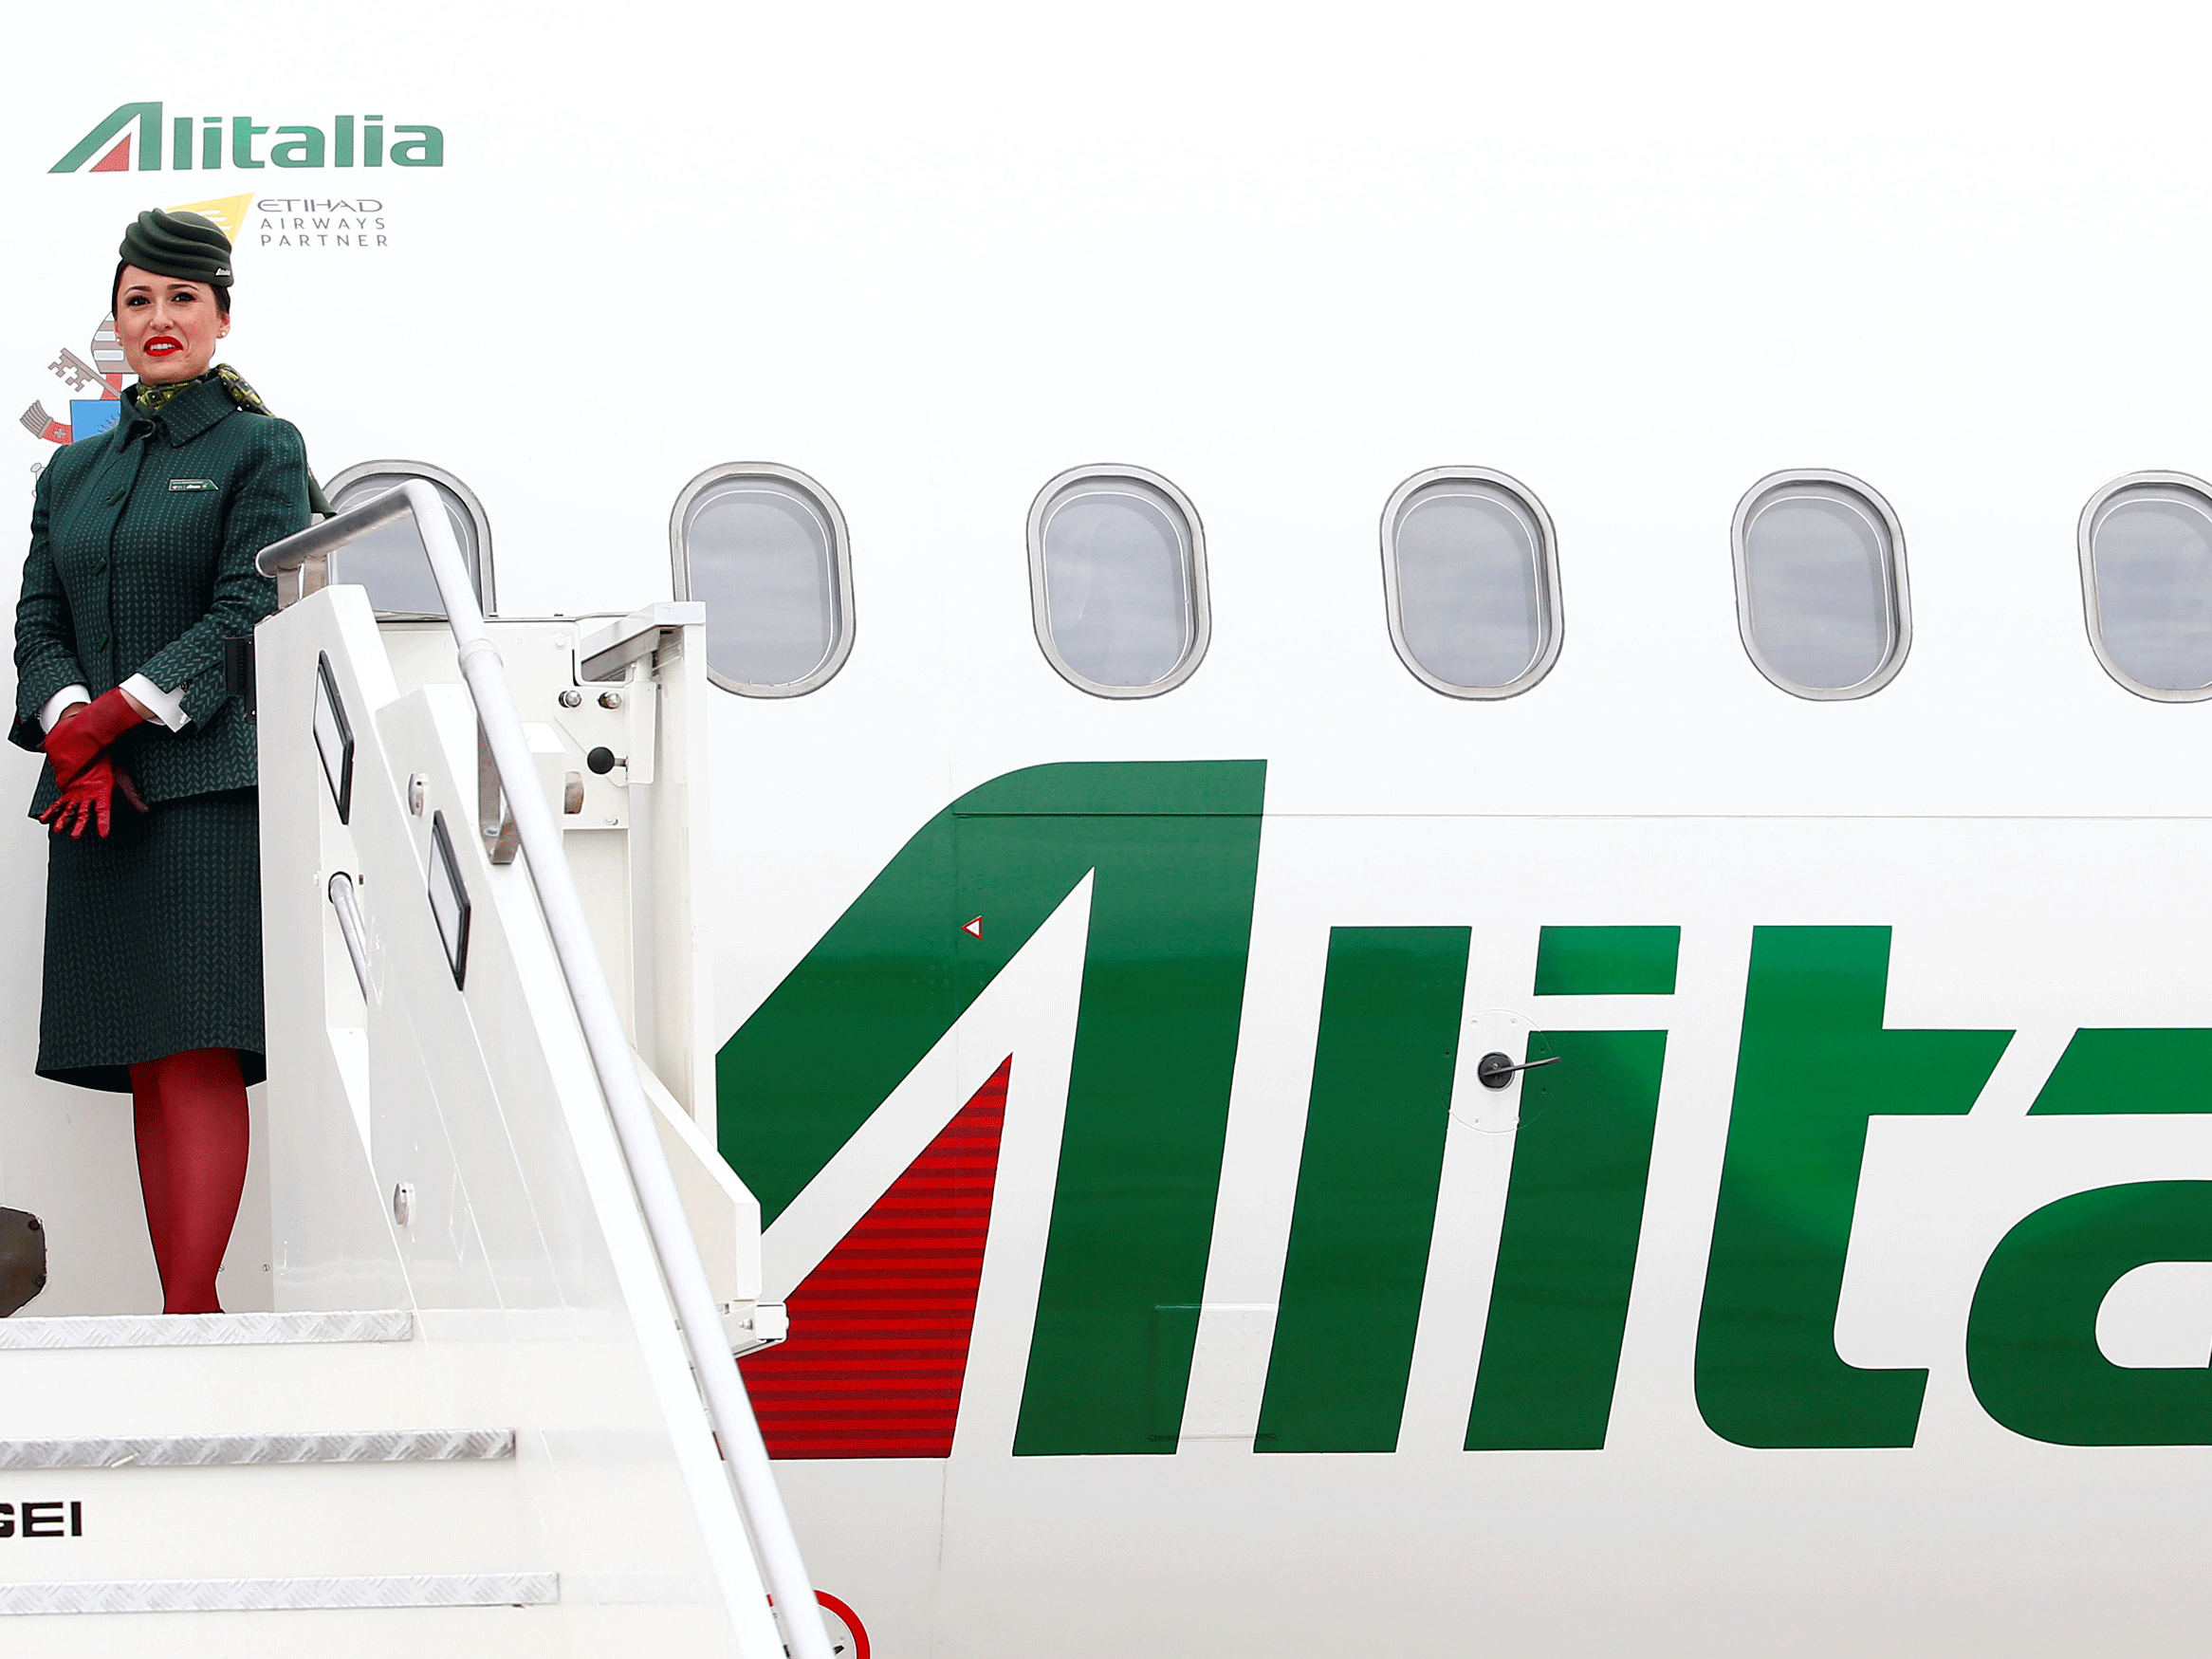 Alitalia, which has 12,500 employees, has been stumbling in the wake of a previous bankruptcy in 2008